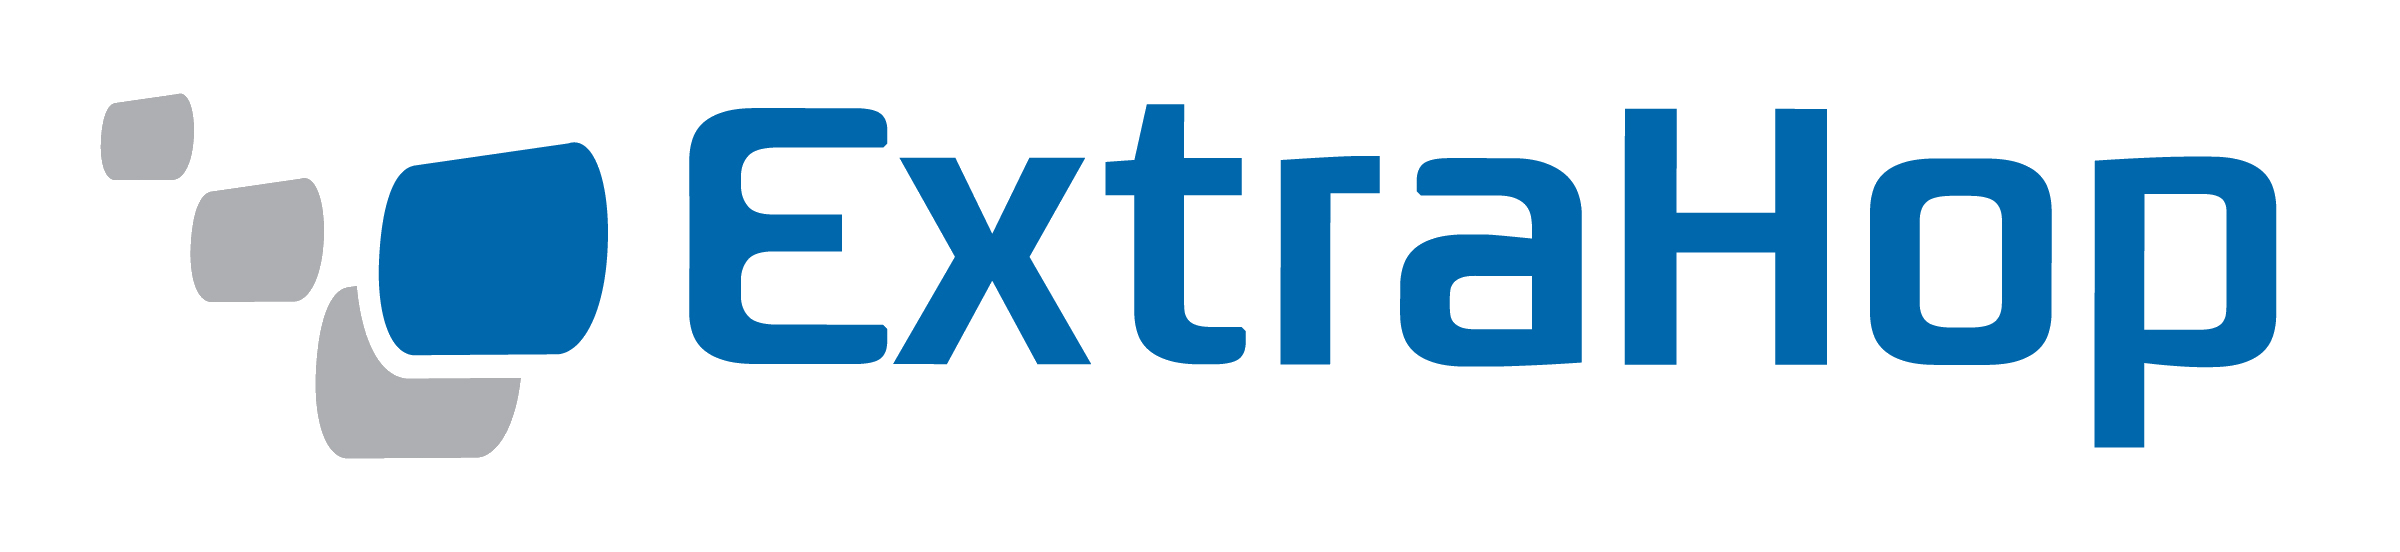 ExtraHop Networks